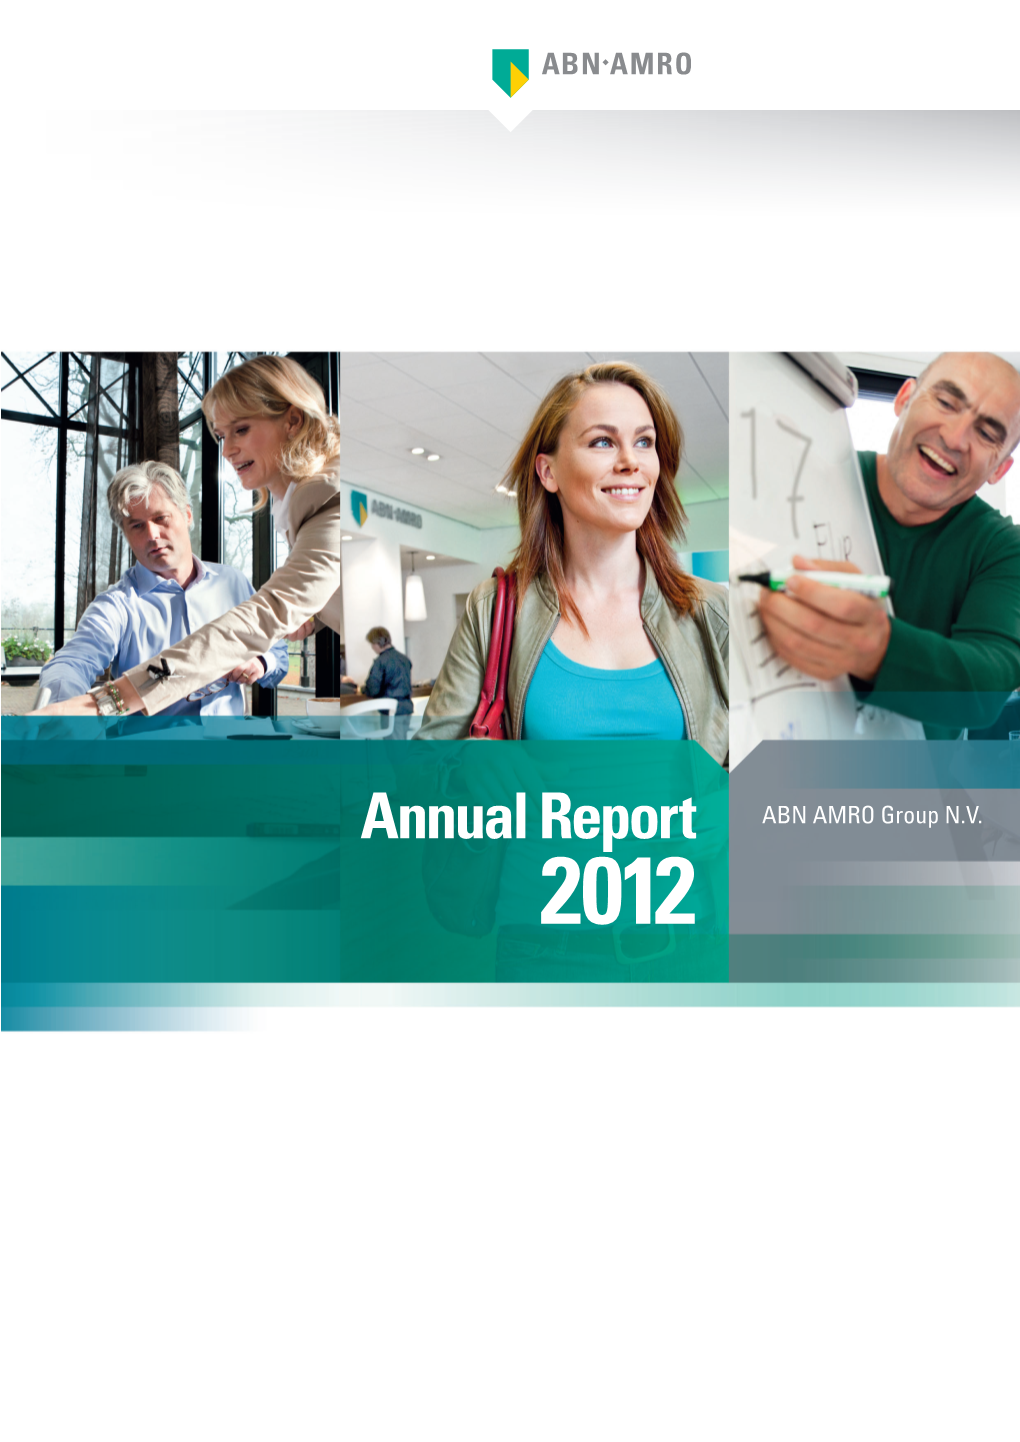 ABN AMRO Annual Report 2012